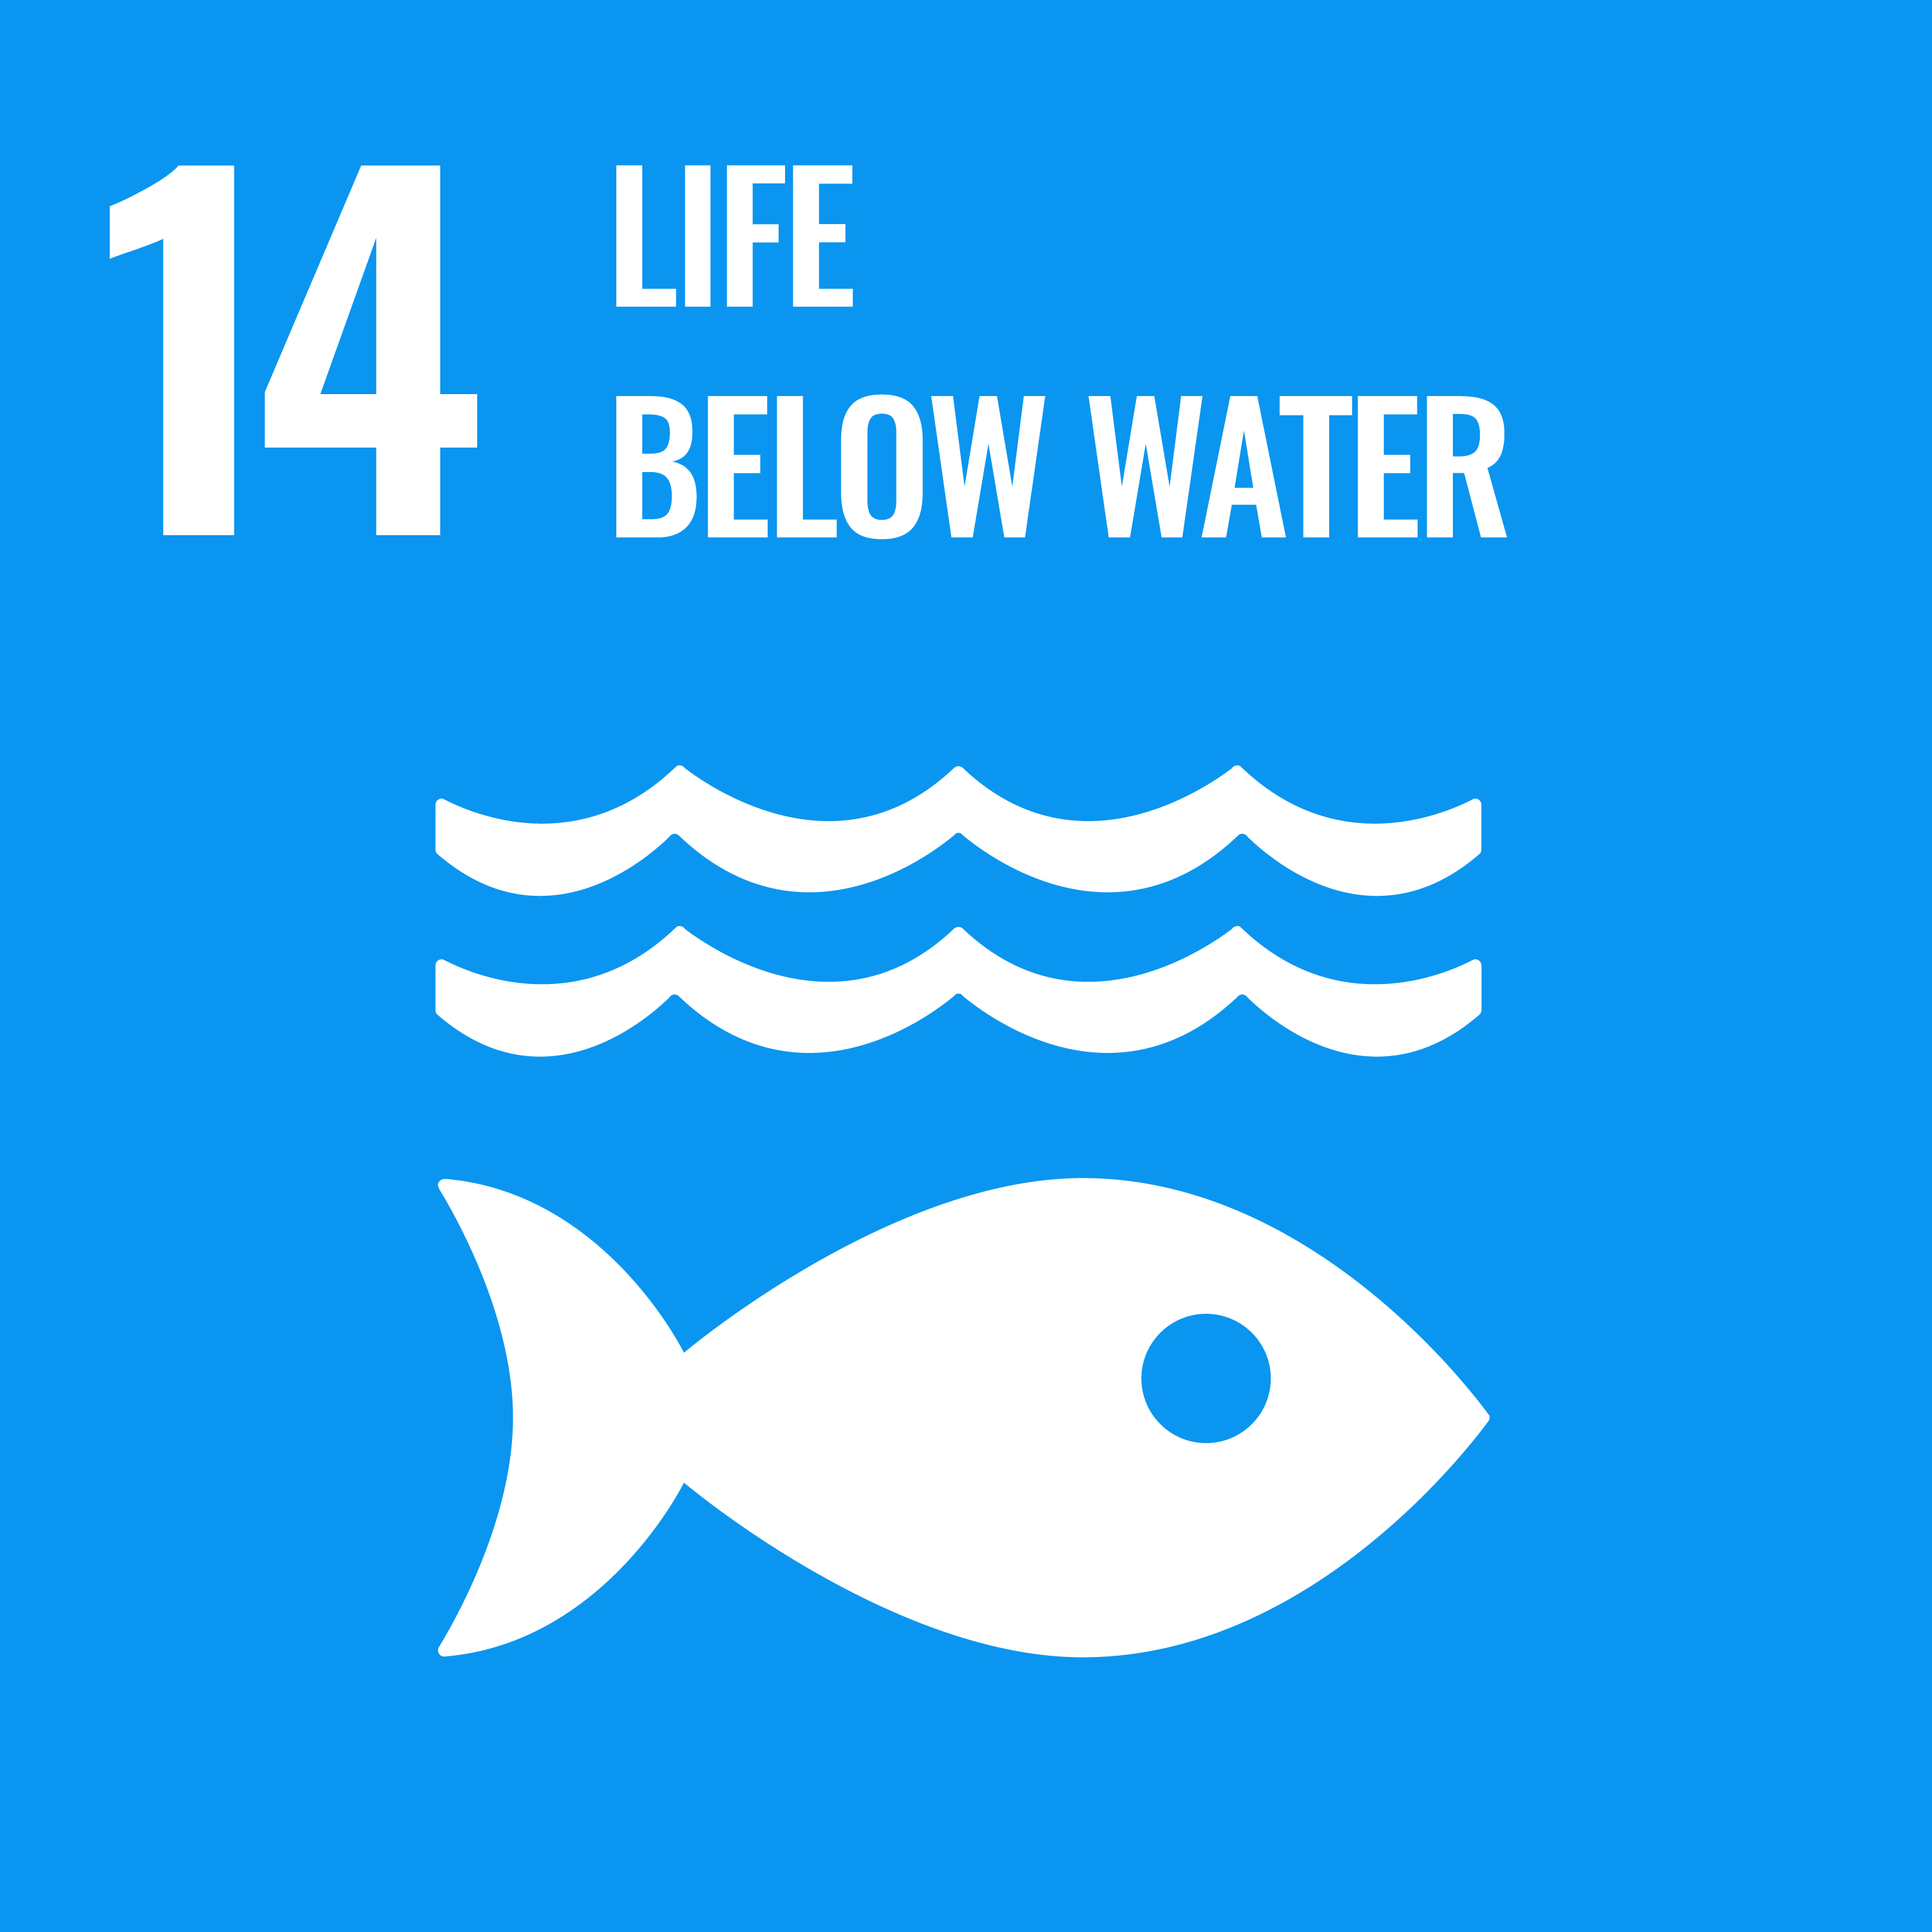 14 Life Below Water (United Nations)